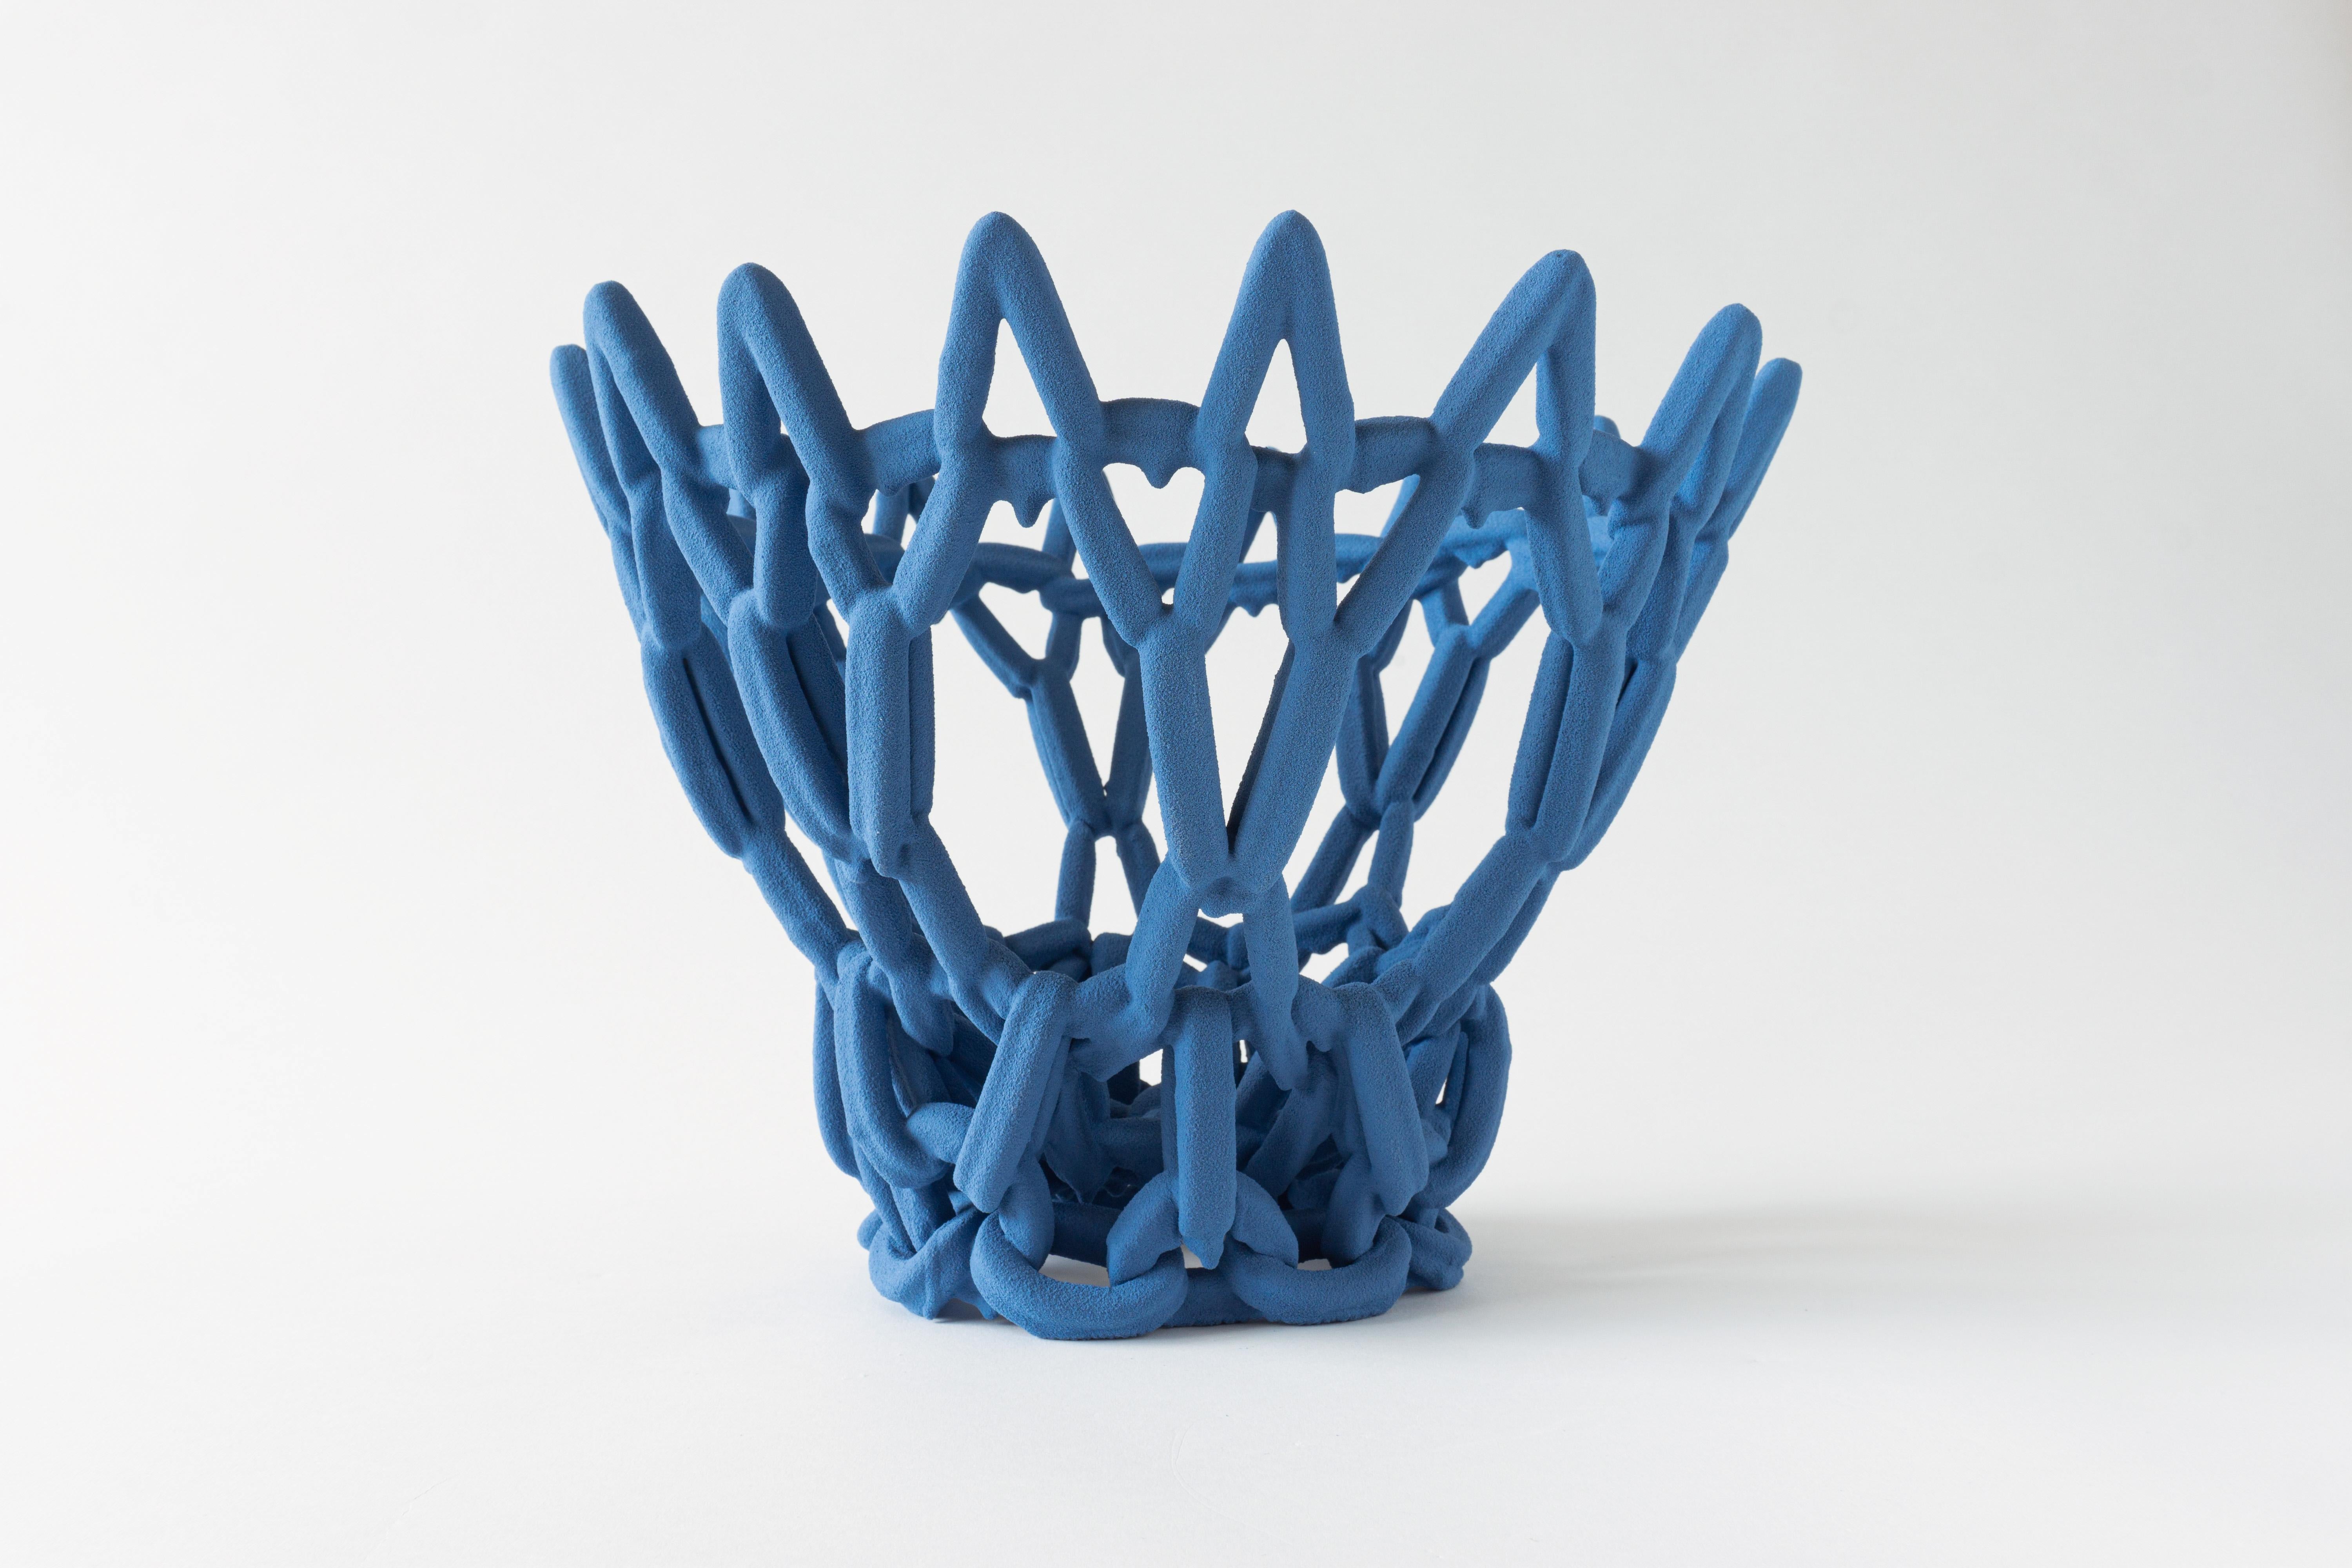 Large chain bowl by Atelier Fig
Dimensions: H 27 x Ø 35 cm.
Material: Porcelain, engobe. 
Color: Cobalt.
Also available in other colors and finishes (glaze/ engobe/ lacquer).

Atelier Fig. is founded by the Dutch designers Gijs Wouters and